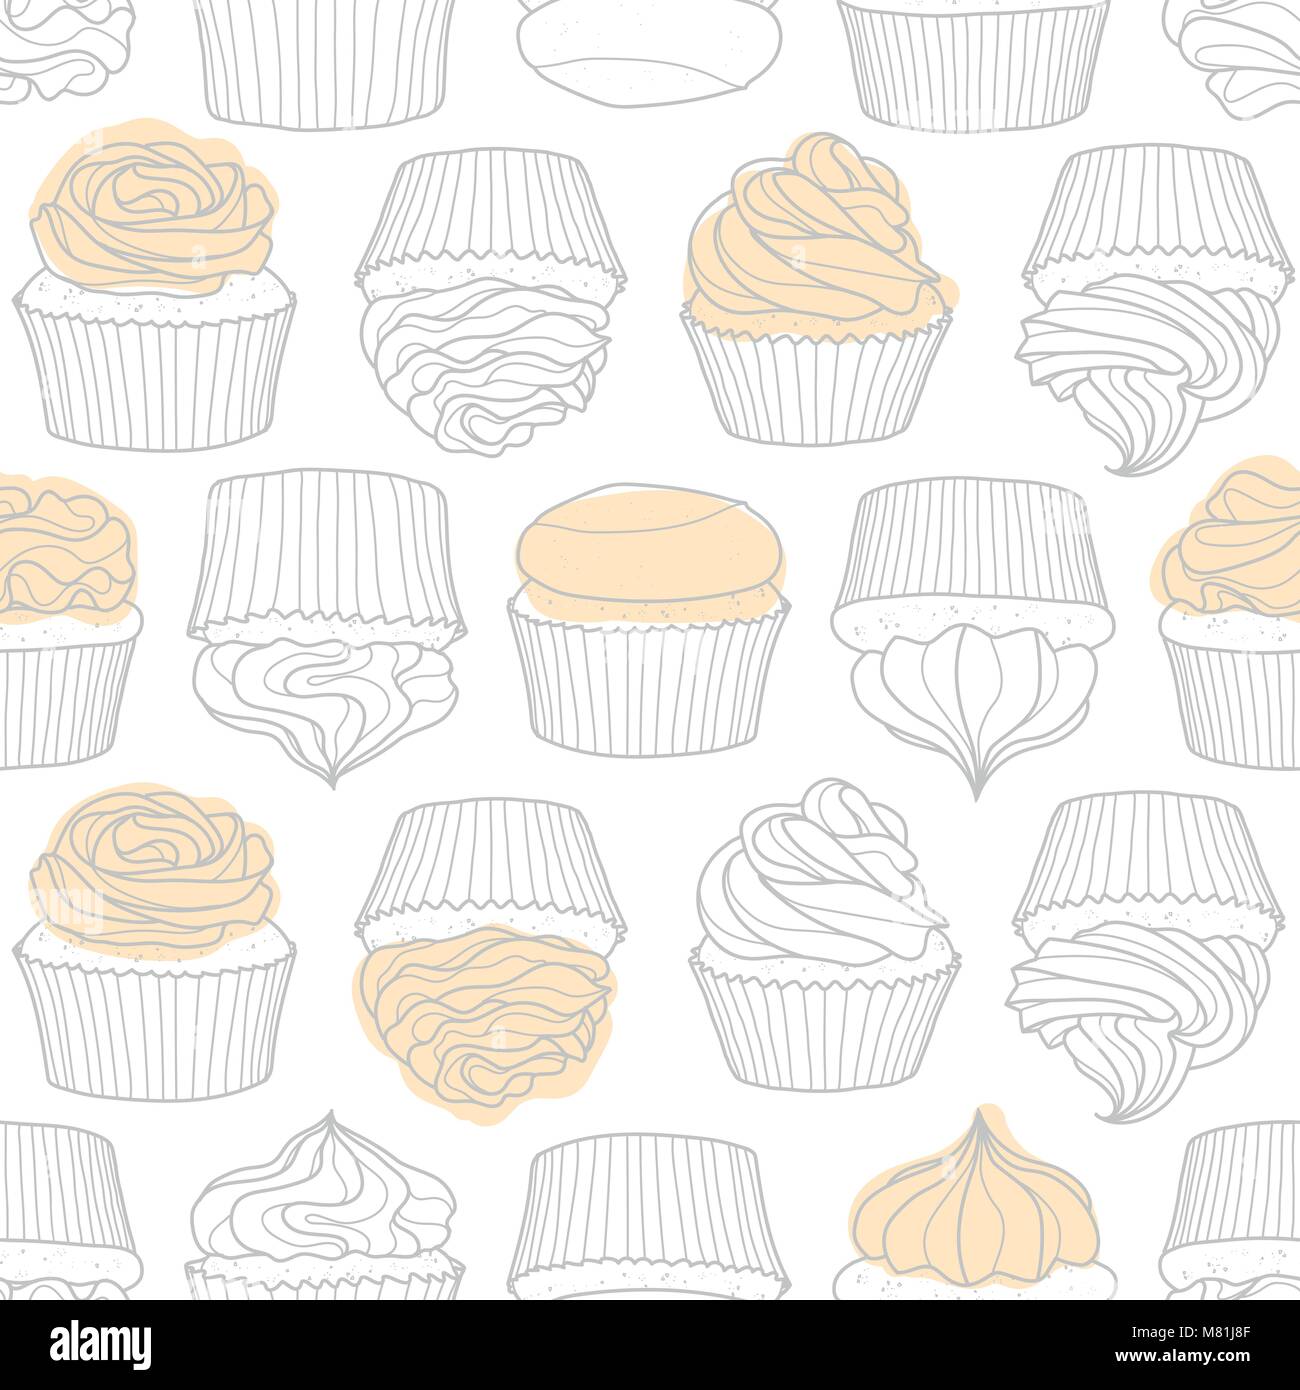 8 styles of cupcake random on white background. Cute hand drawn seamless pattern of dessert in gray outline and pastel pink plane. Stock Vector